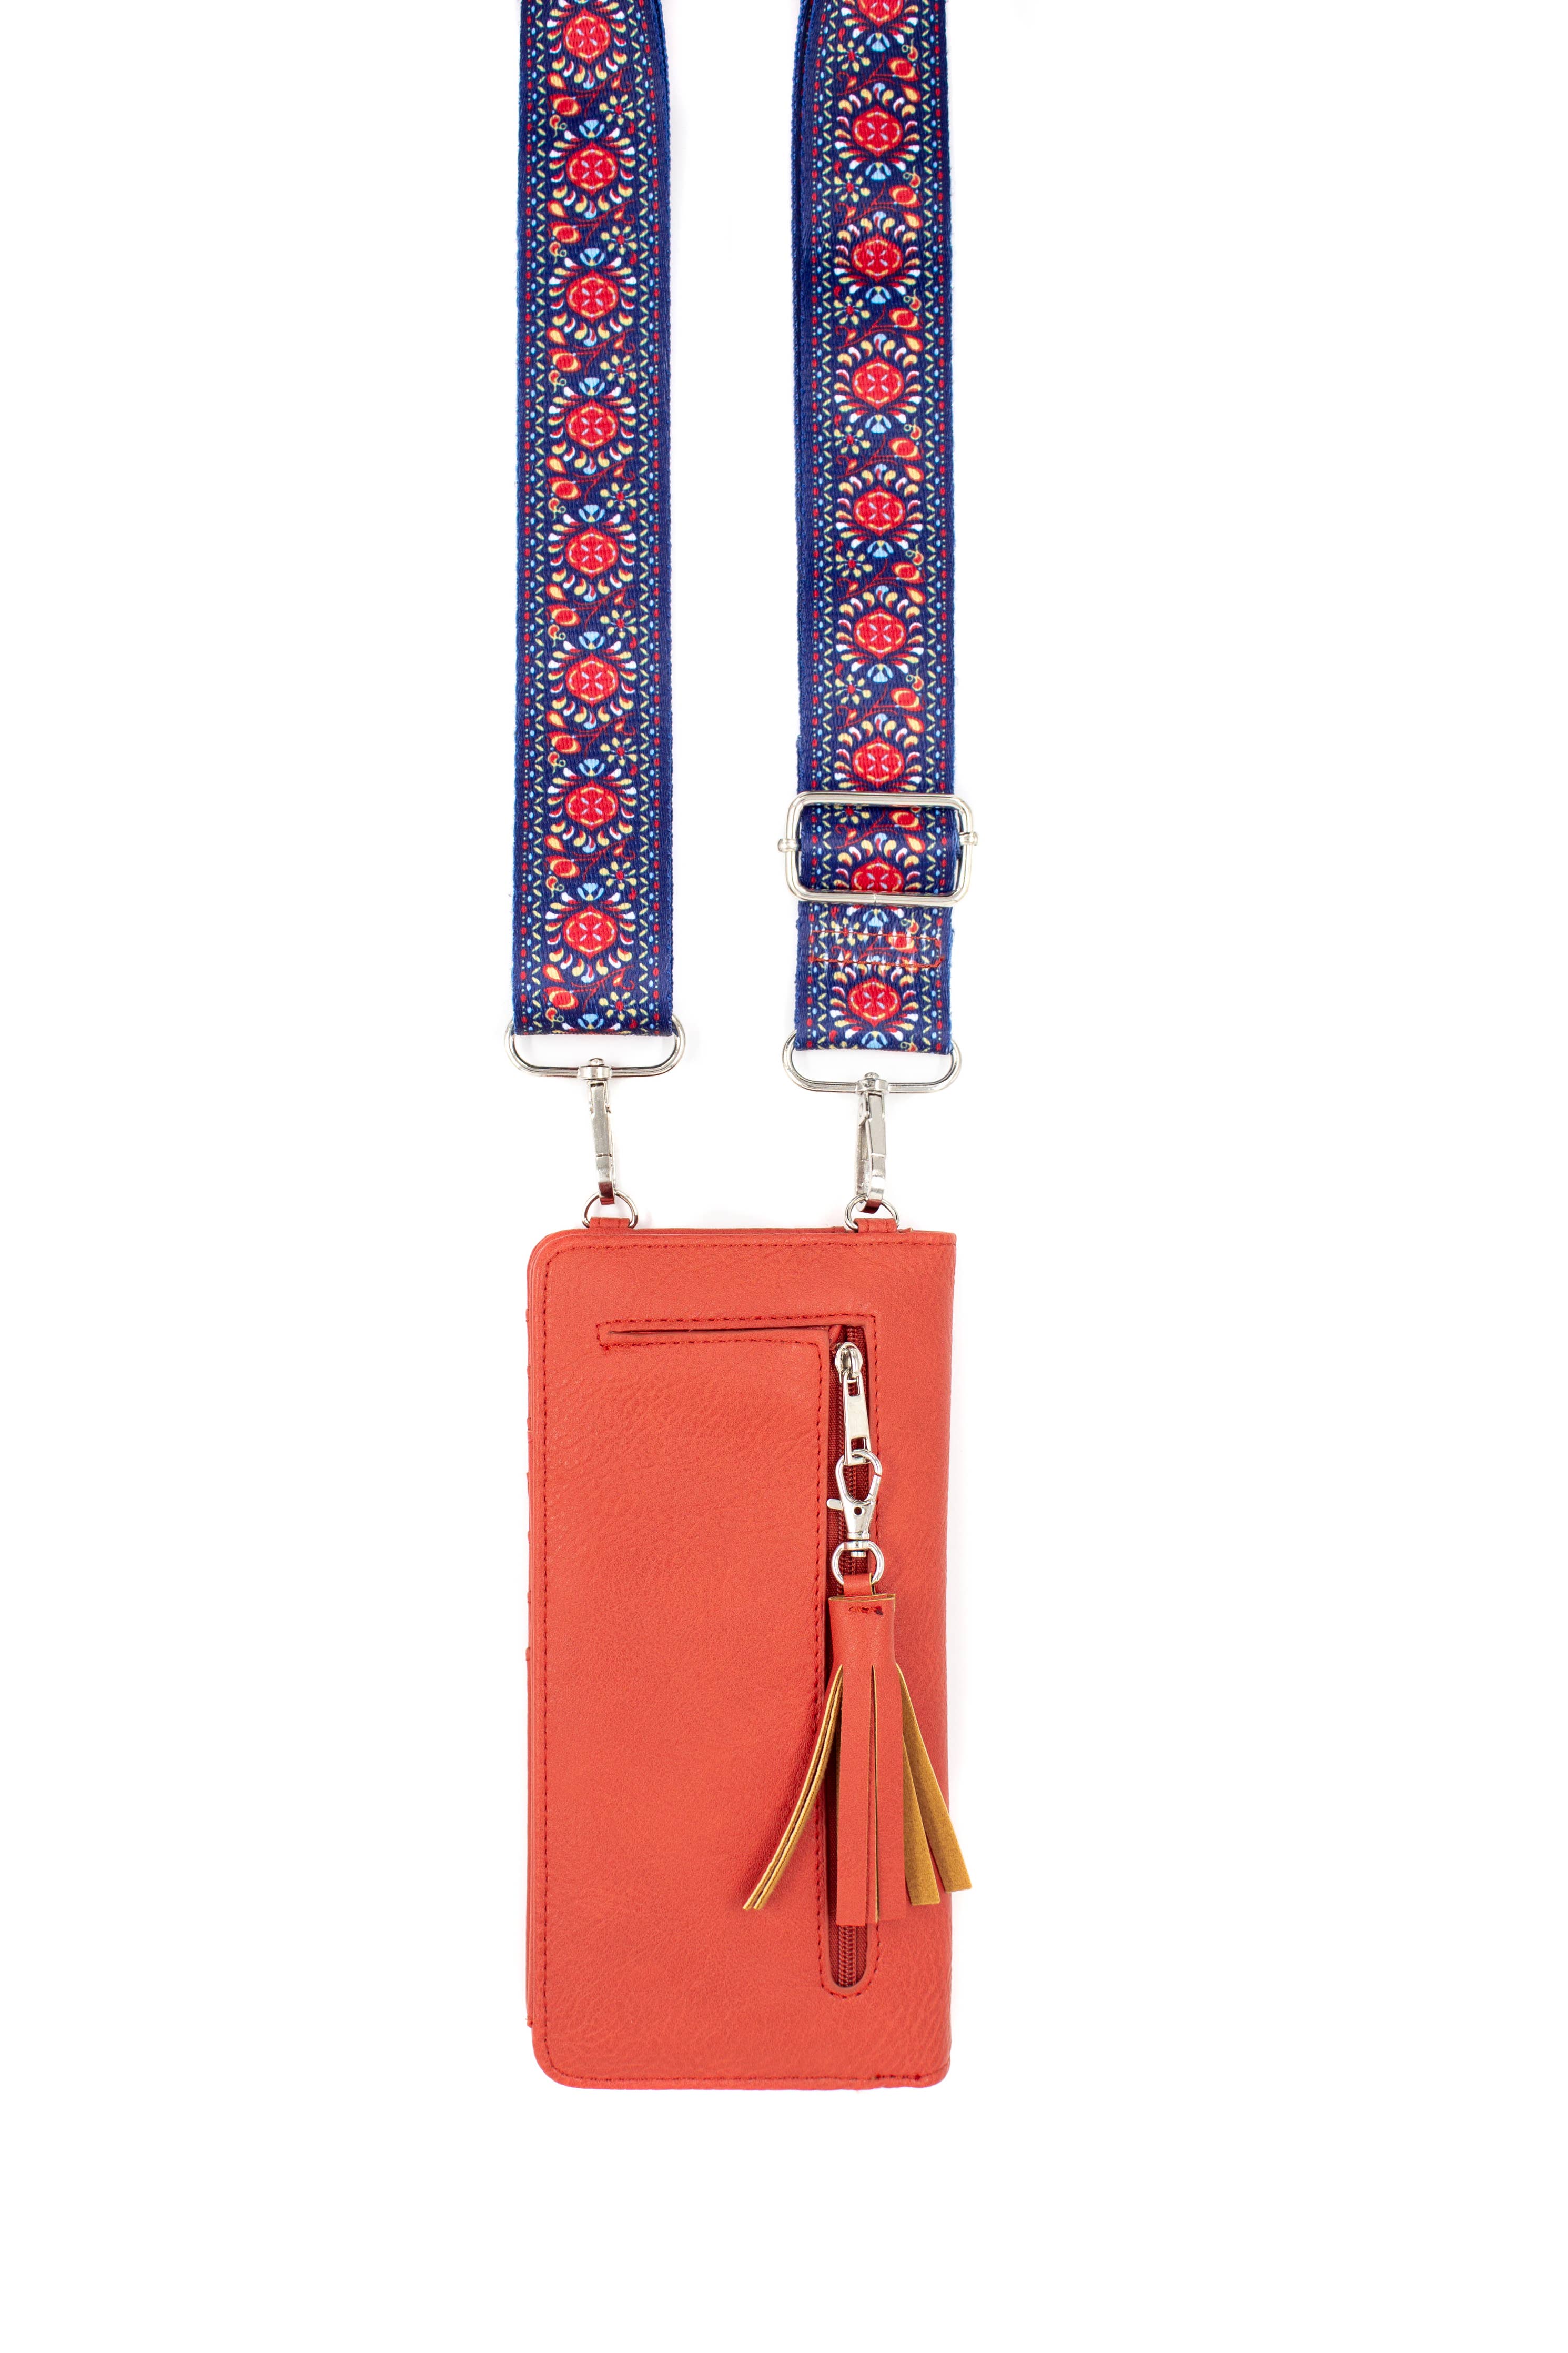 K. Carroll Accessories - Nicole Crossbody, Back in stock with new Colors:)